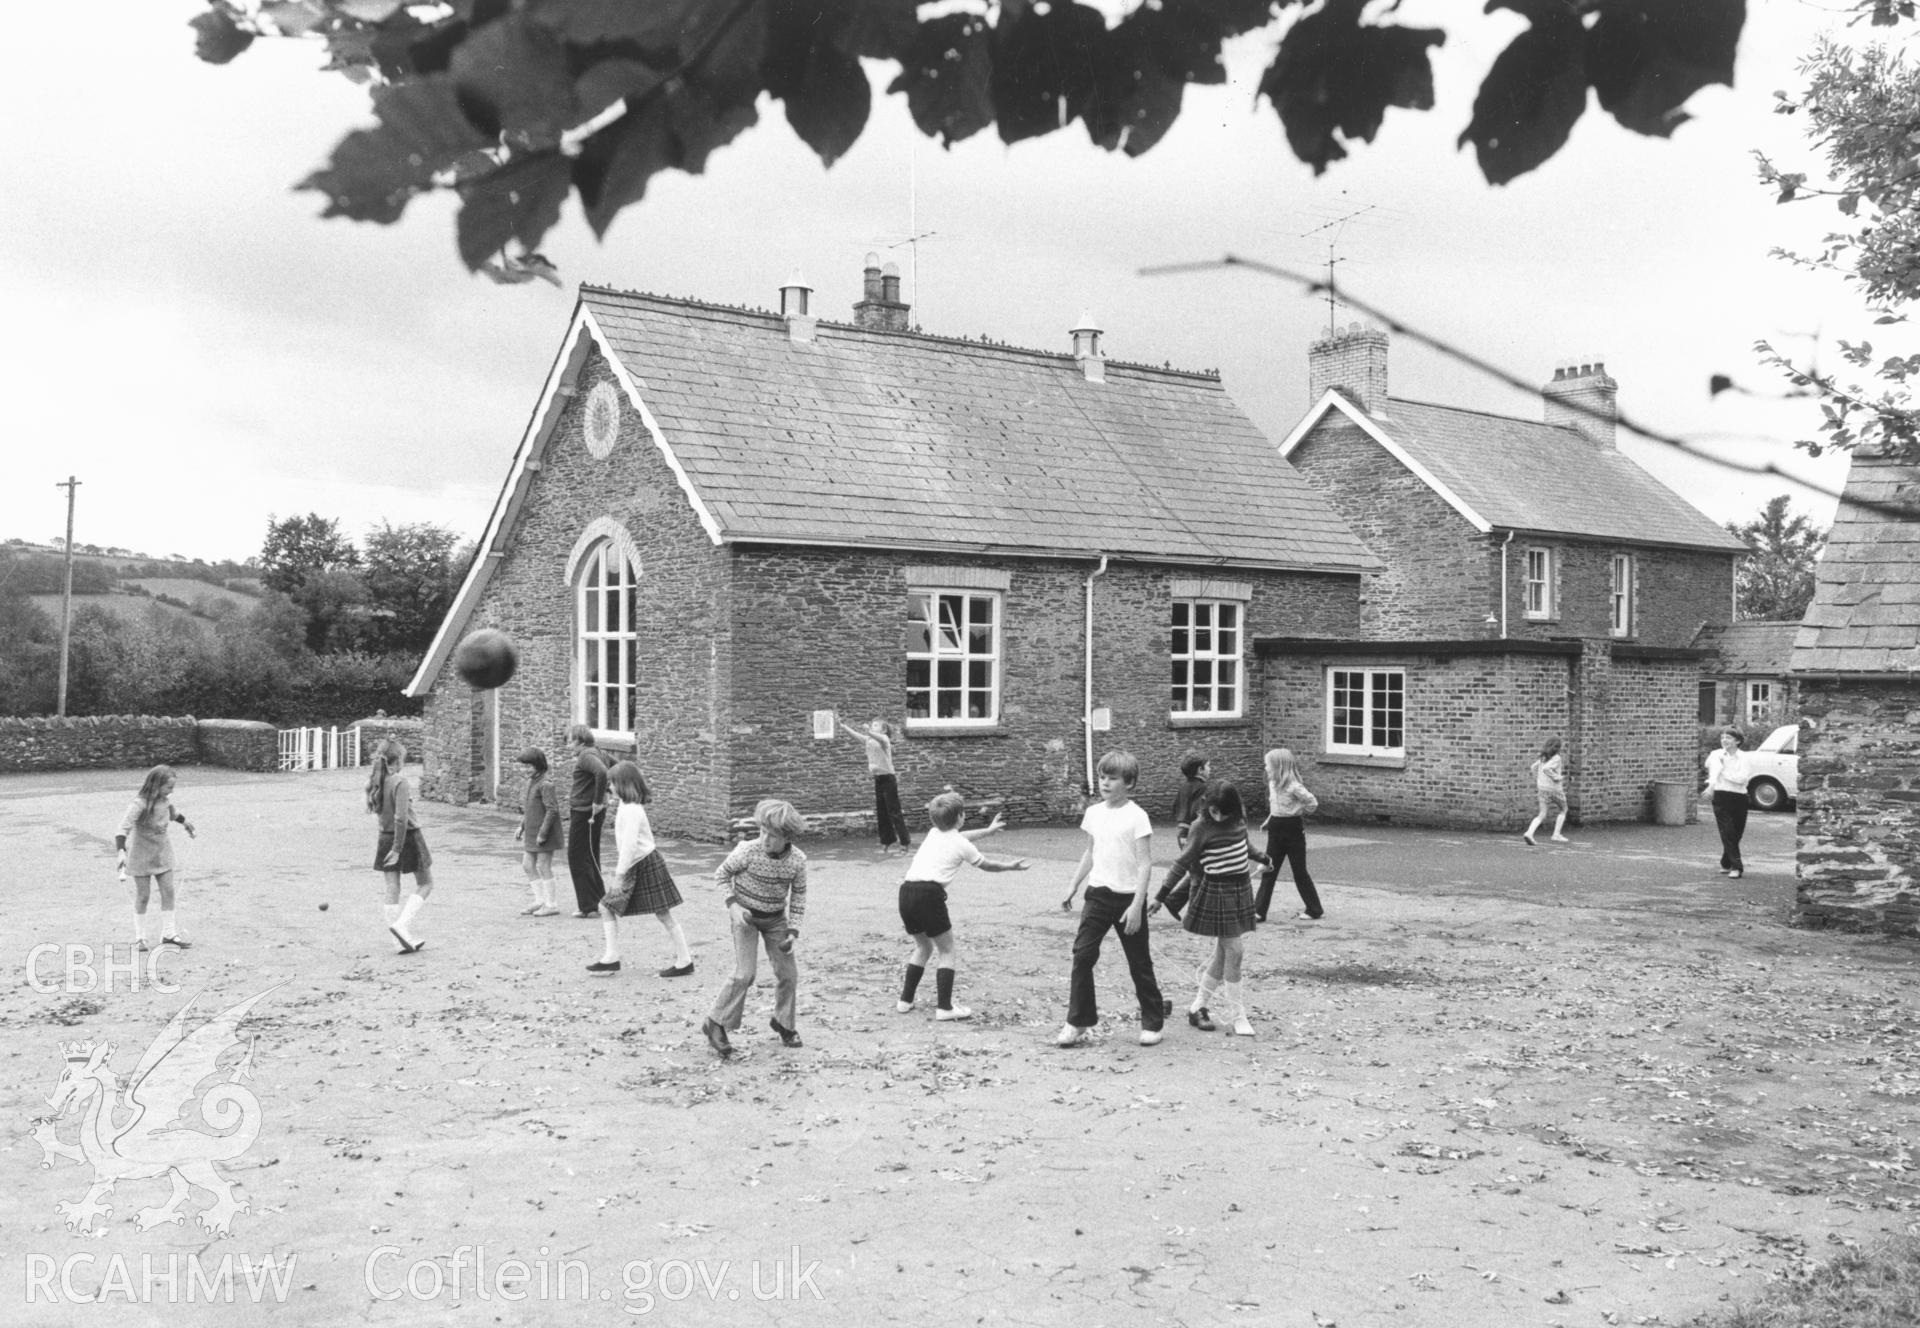 1 b/w print showing exterior view of the primary school, Llangybi (Monmouthshire) with children playing; collated by the former Central Office of Information.